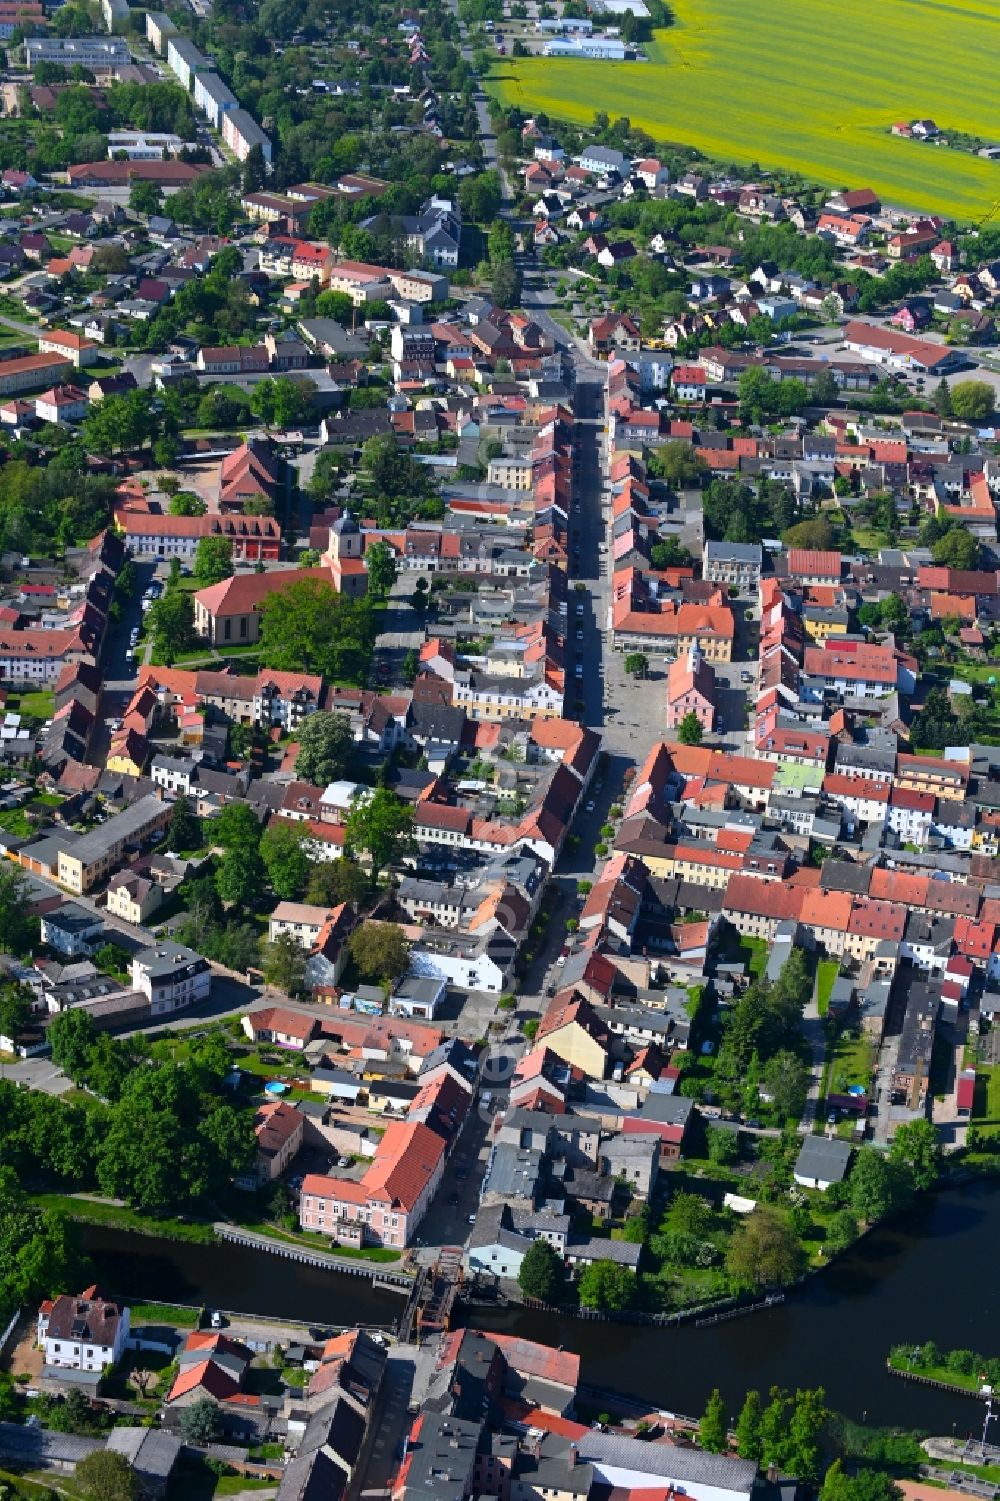 Aerial image Zehdenick - City view of the inner city area along Dammhaststrasse in Zehdenick in the state Brandenburg, Germany